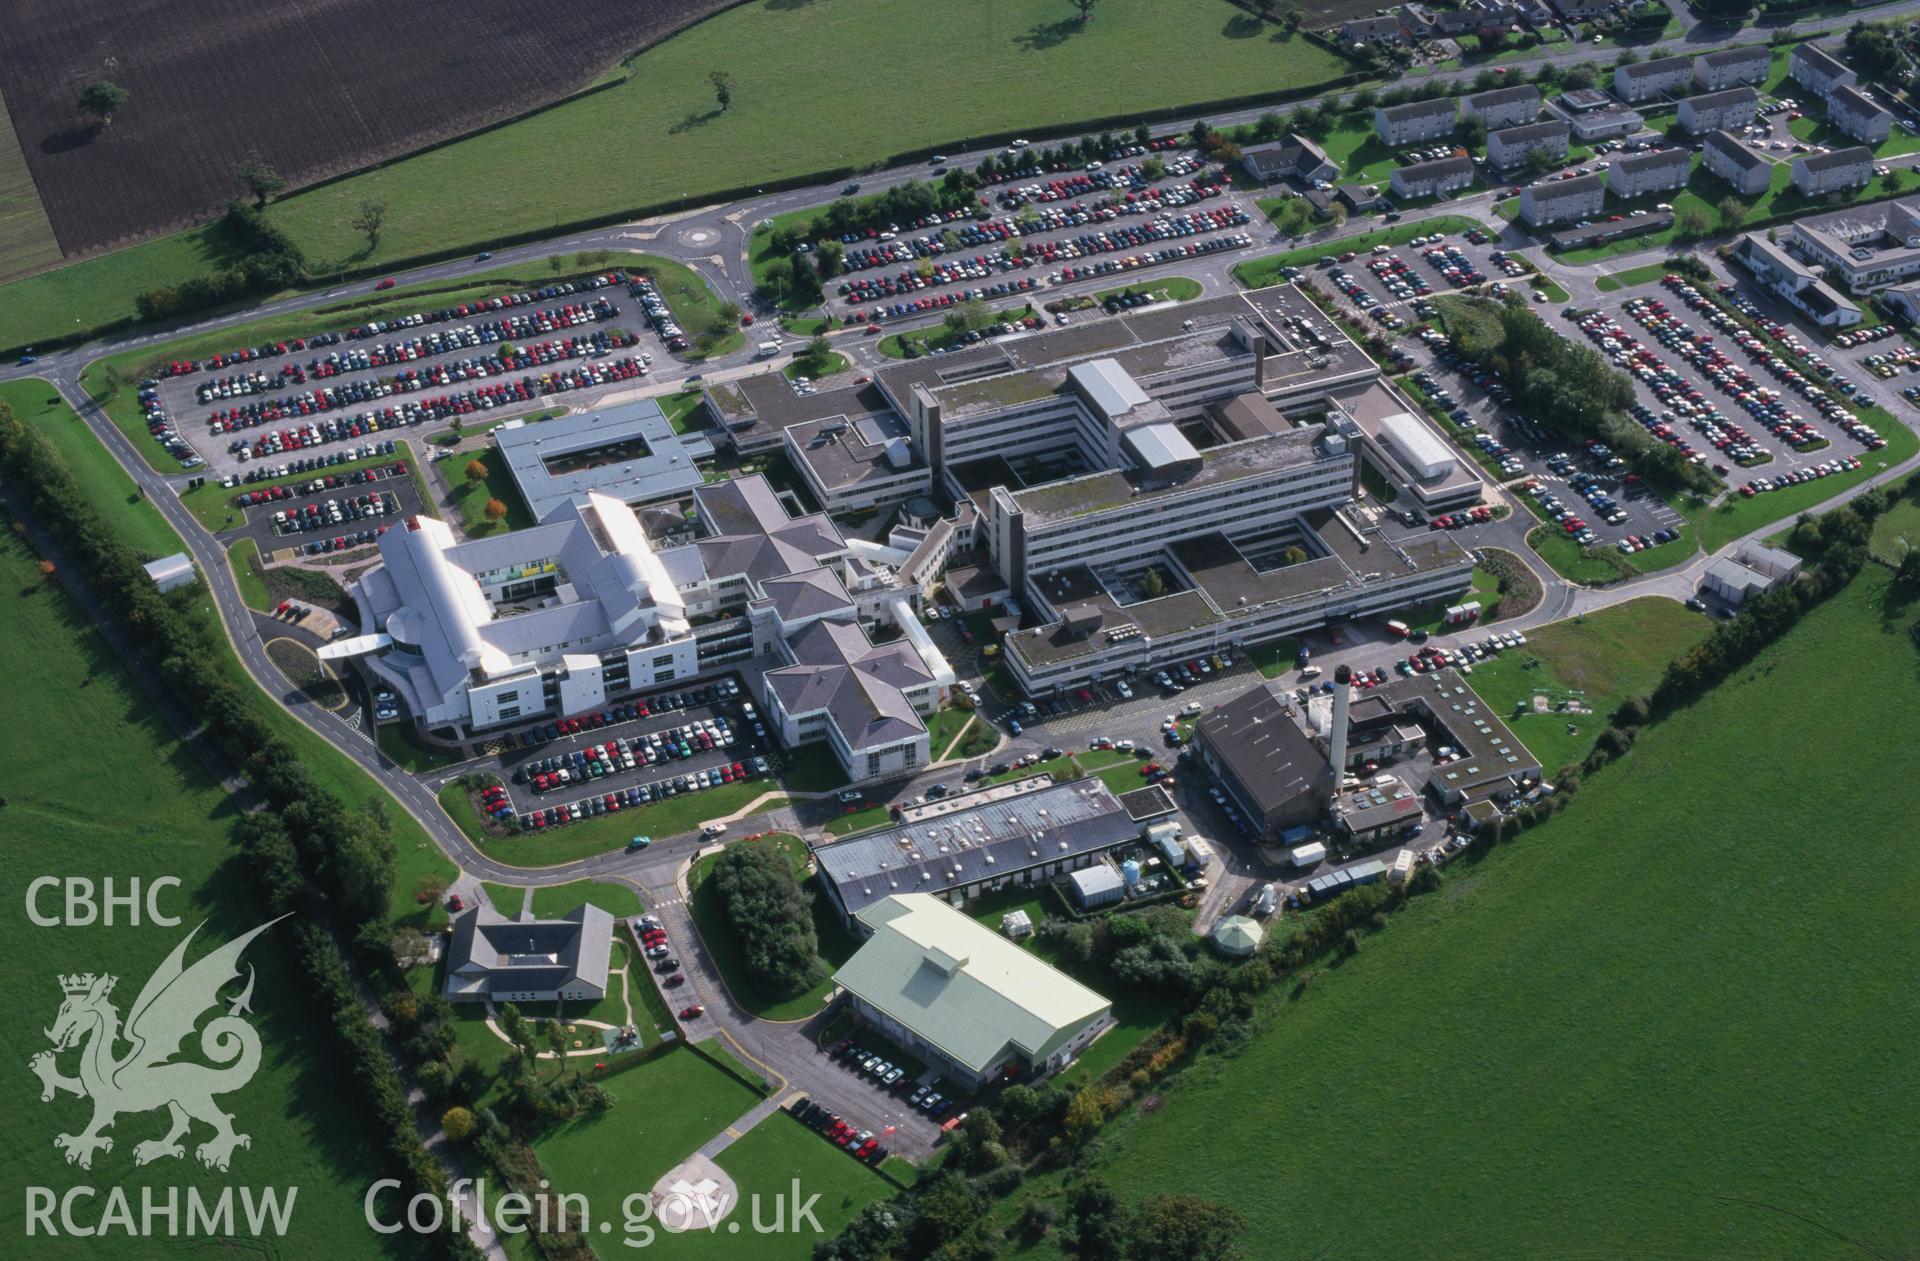 Slide of RCAHMW colour oblique aerial photograph of Bodelwyddan Hospital, taken by T.G. Driver, 17/10/2000.